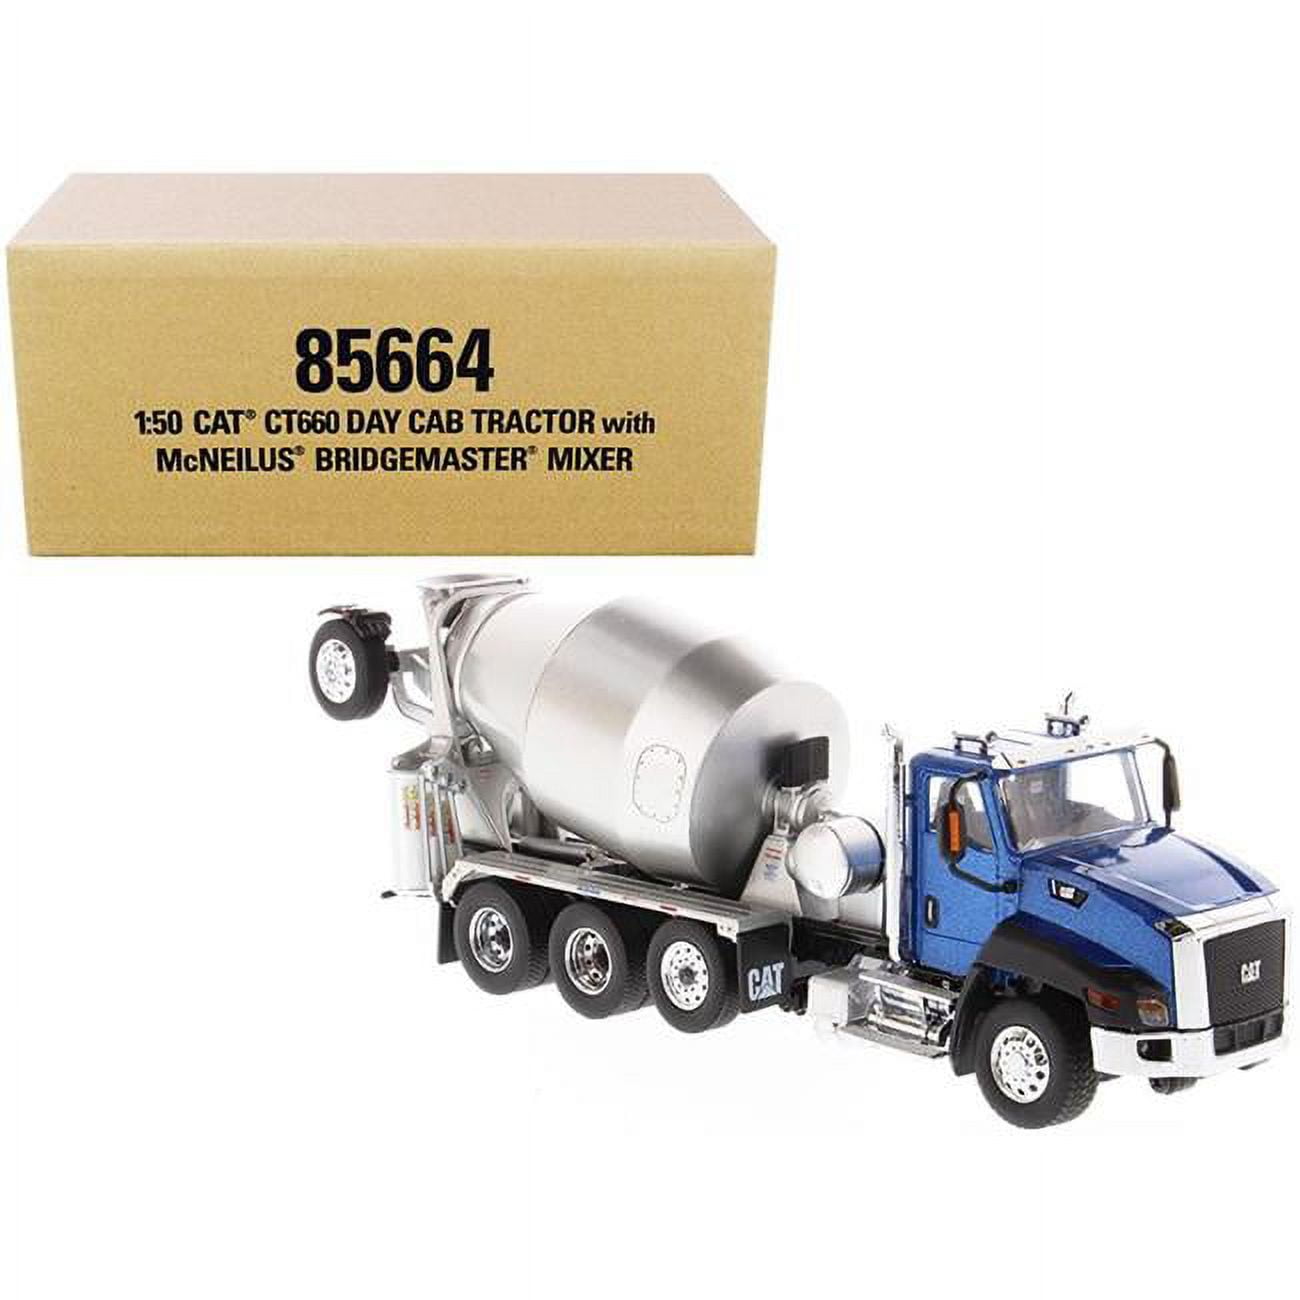 Picture of DieCast Masters 85664 1-50 Diecast Model for CAT Caterpillar CT660 Day Cab Tractor with McNeilus Concrete Mixer Truck Blue Metallic